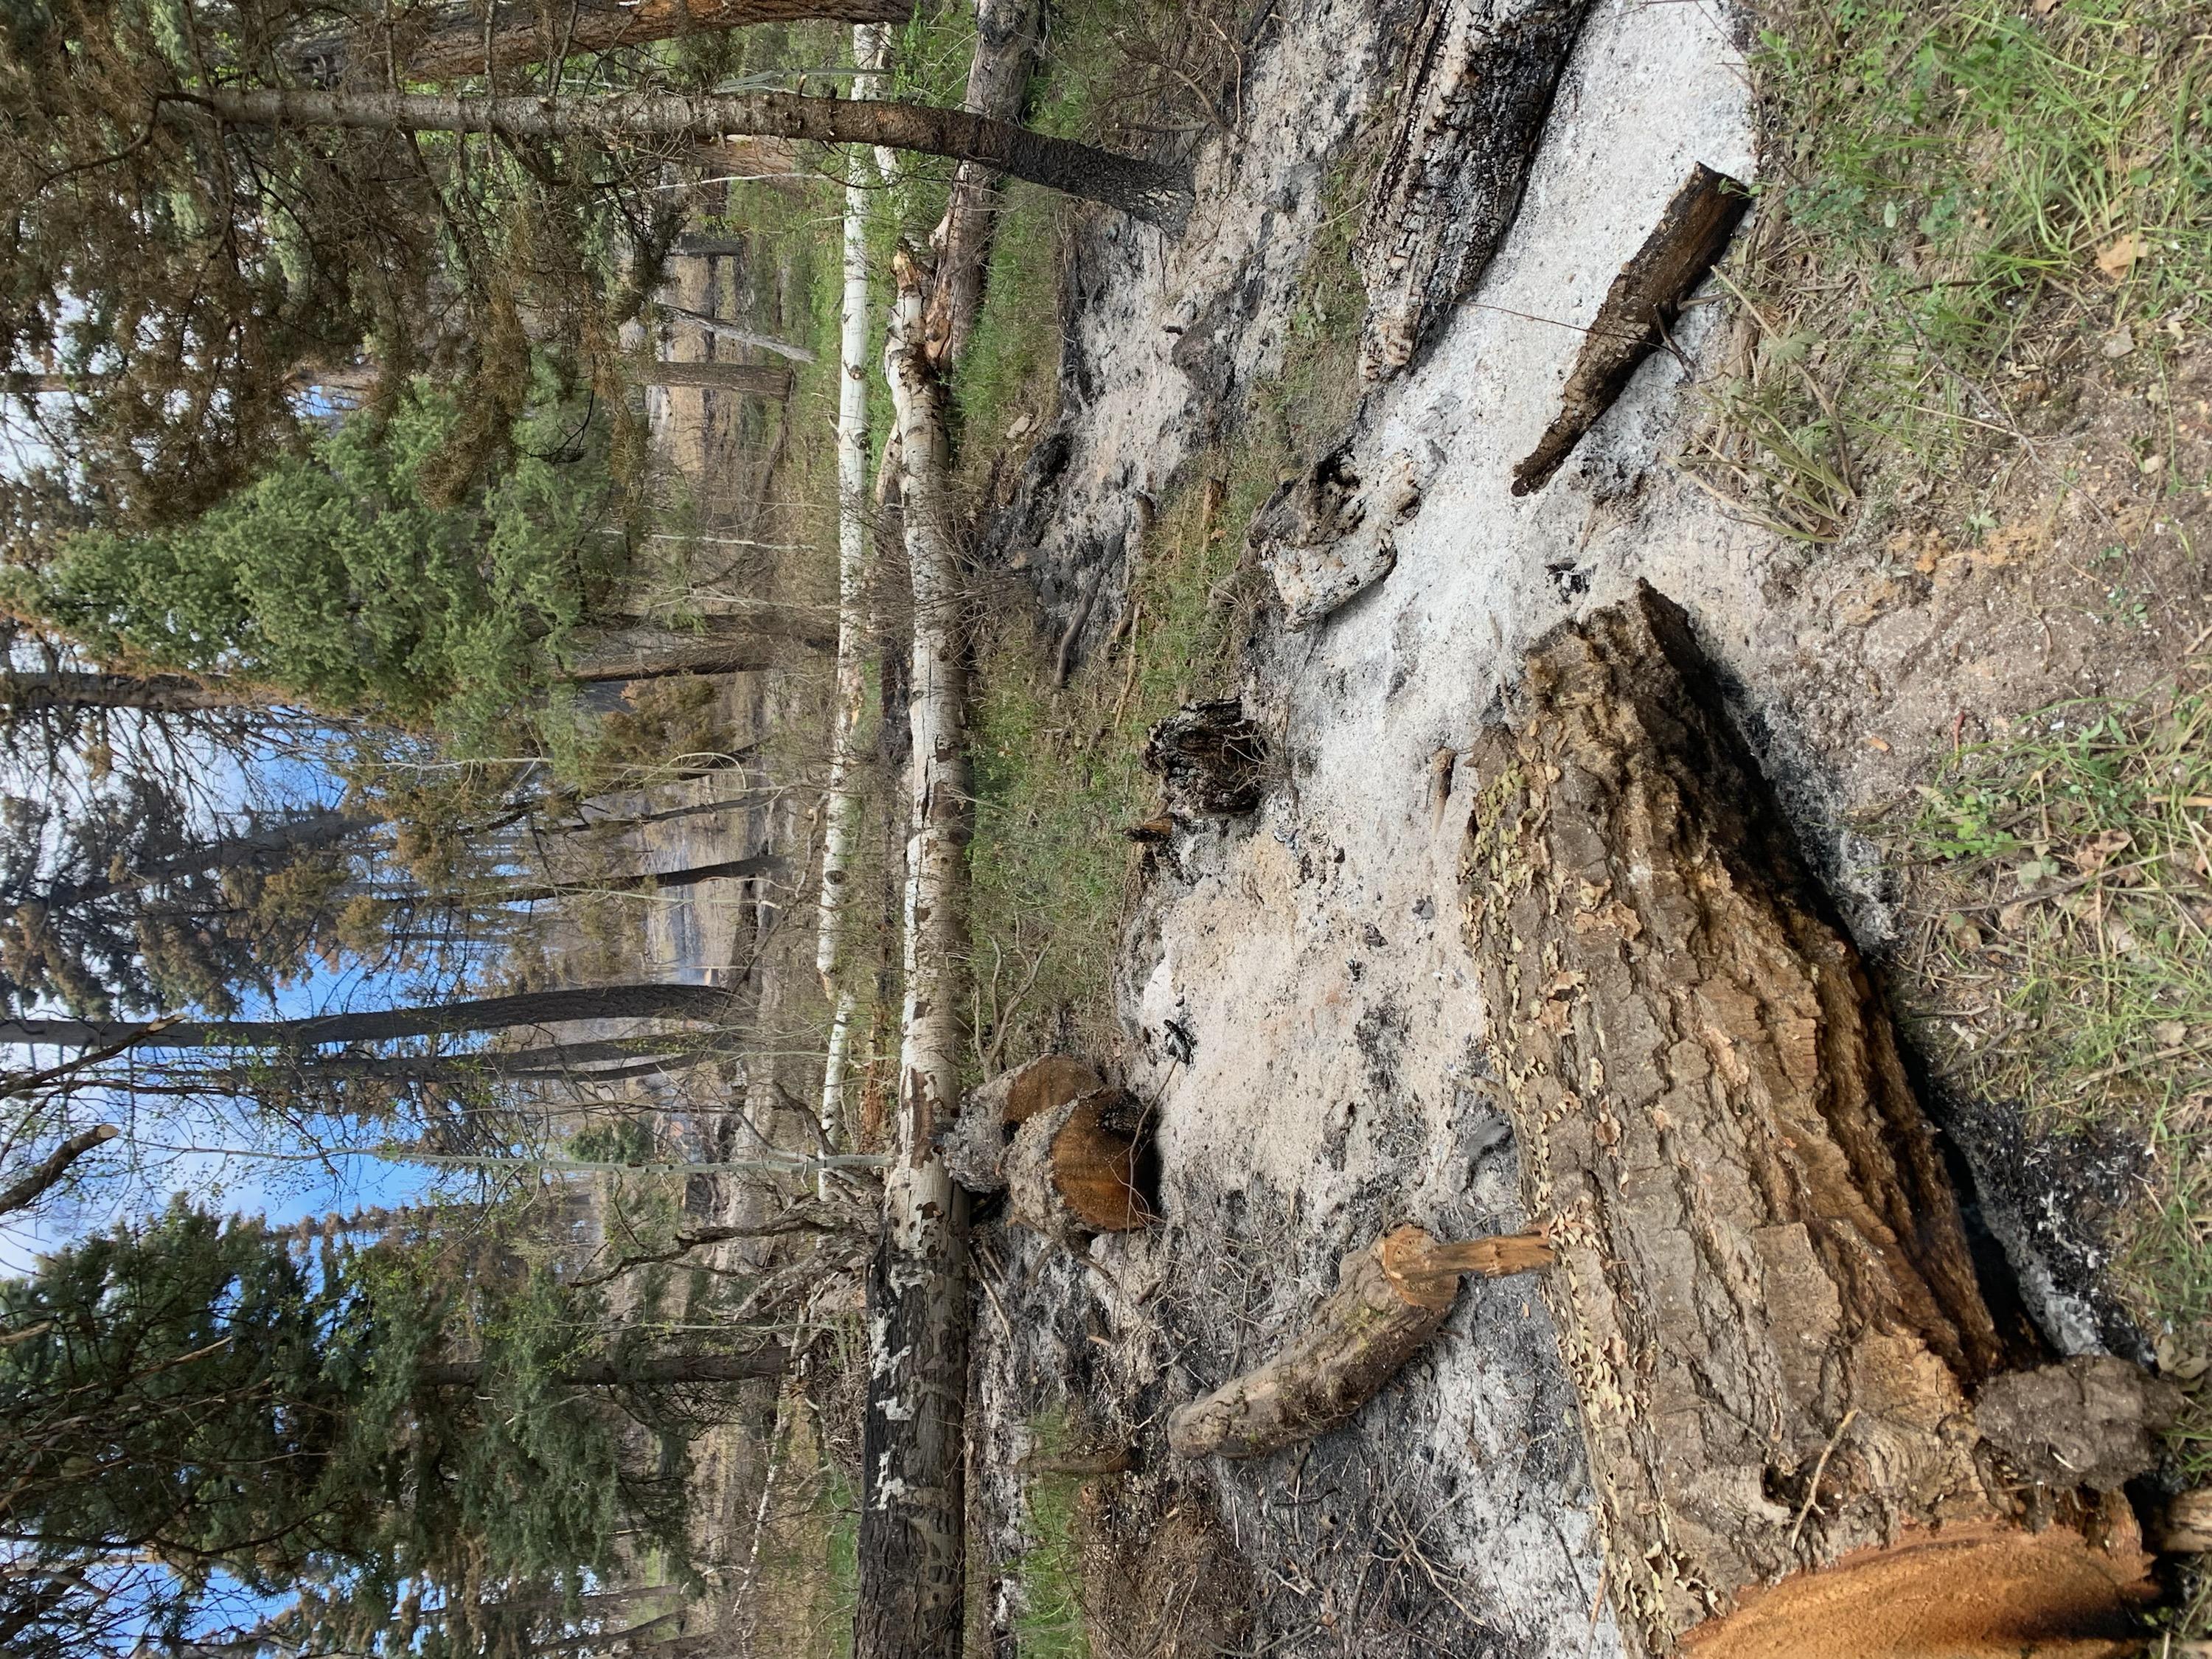 White and grey ash lay on the ground where a spot fire has burned. A cut-up log lays on the ground with unburned grass and trees around a spot fire.